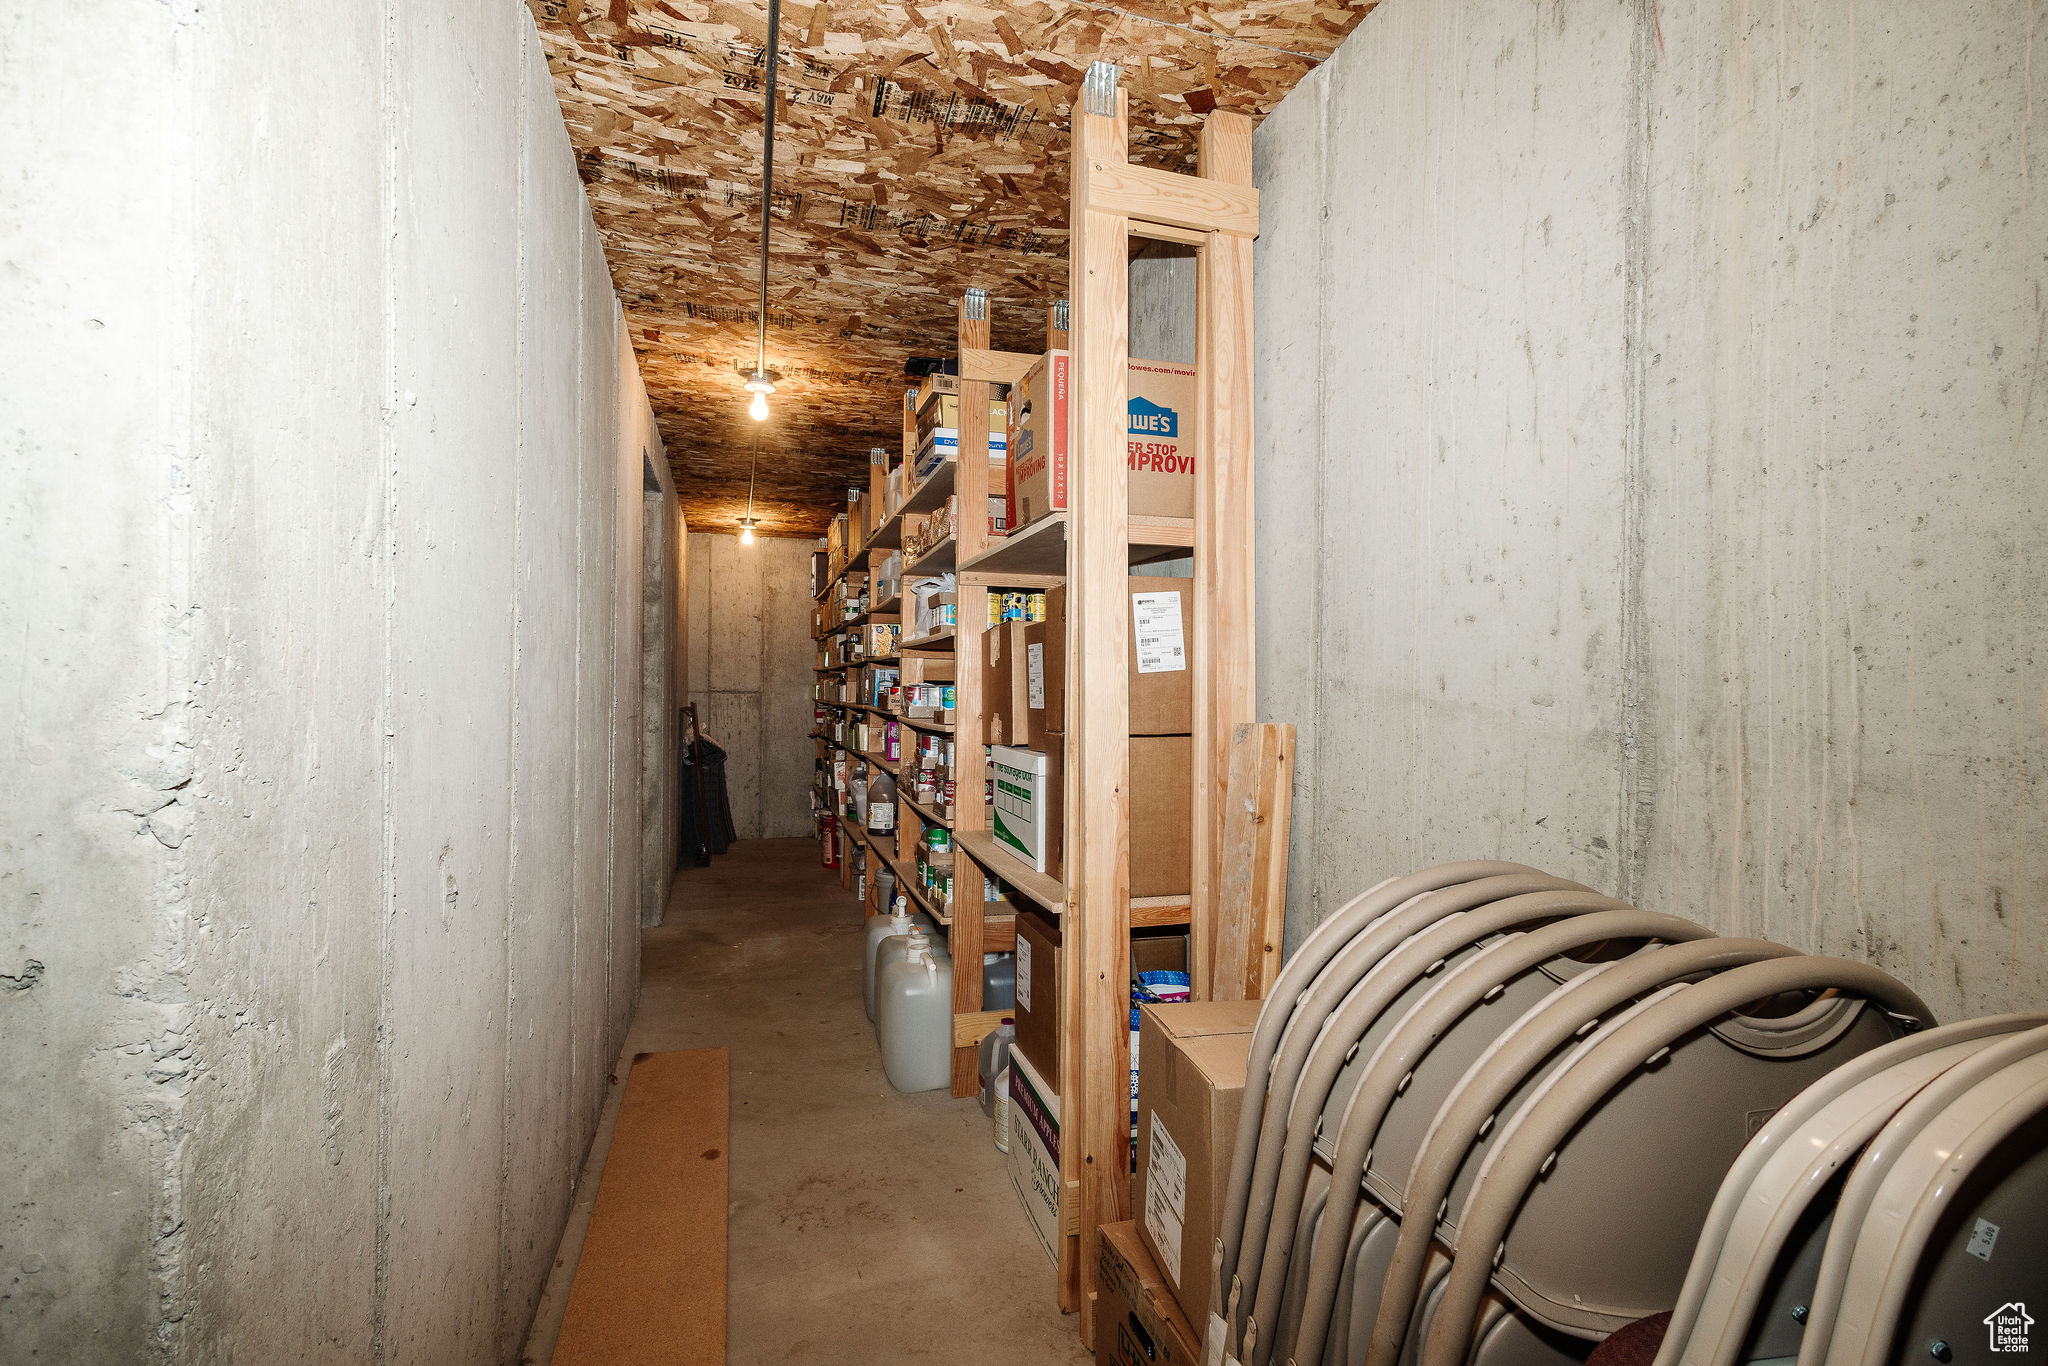 View of storage room with anchored/built shelving for storage.  Cool tempature for storage.